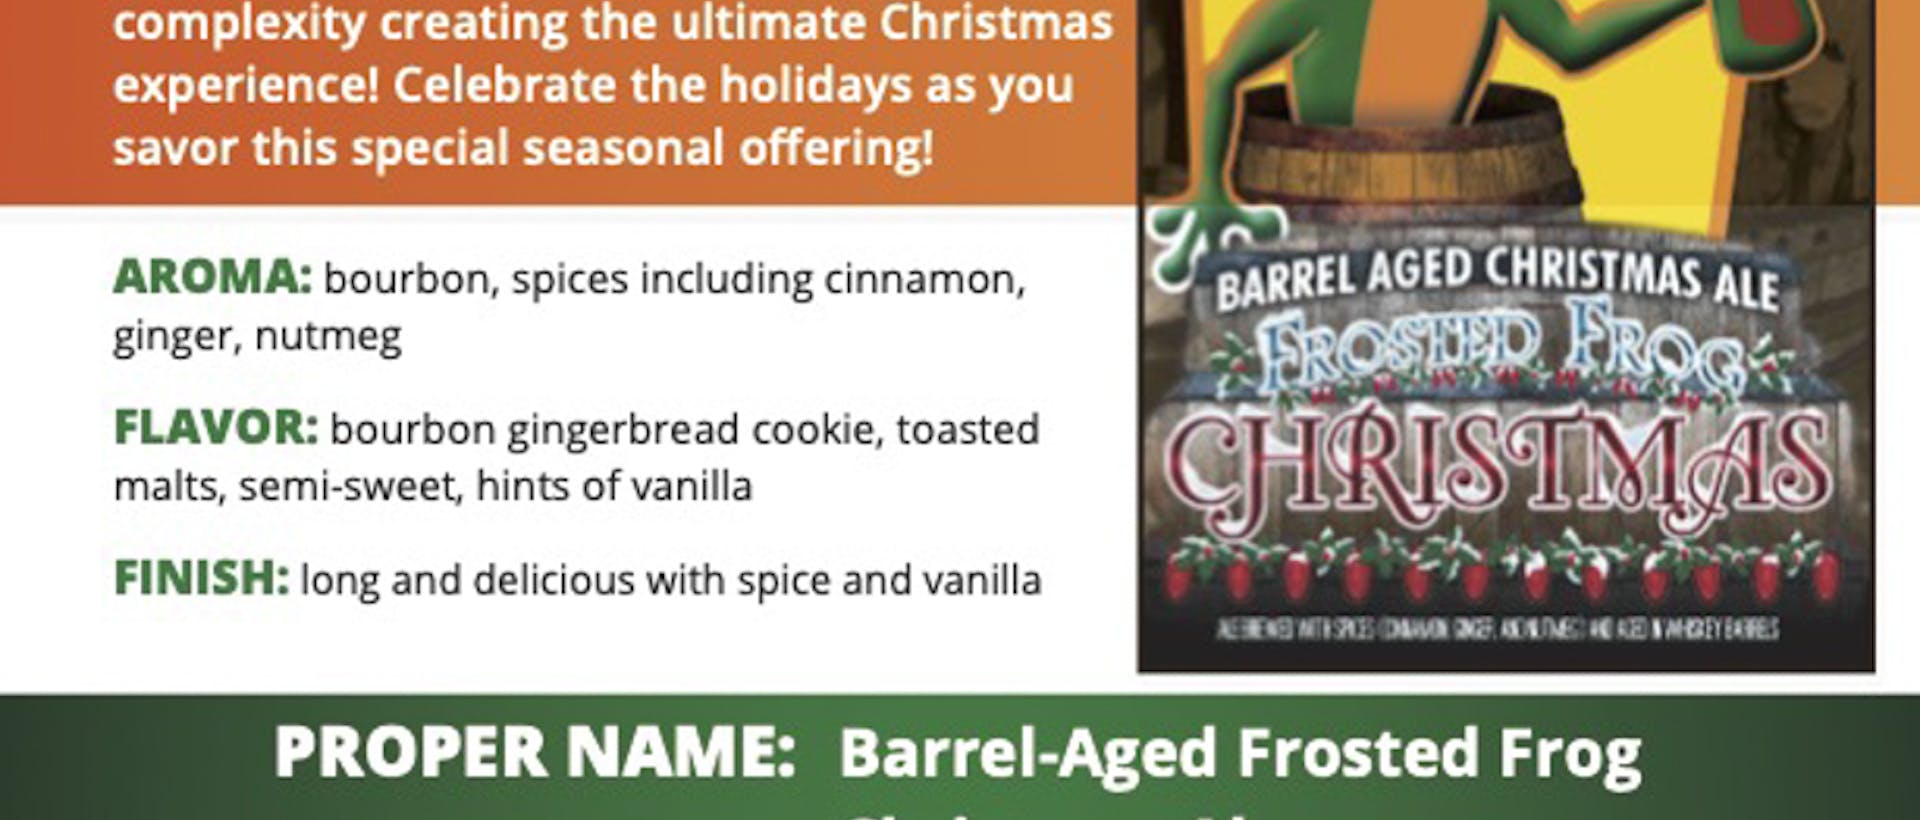 HF_Sell Sheet - Barrel-Aged Series - Barrel-Aged Frosted Frog Christmas Ale (updated 03-14-2022)